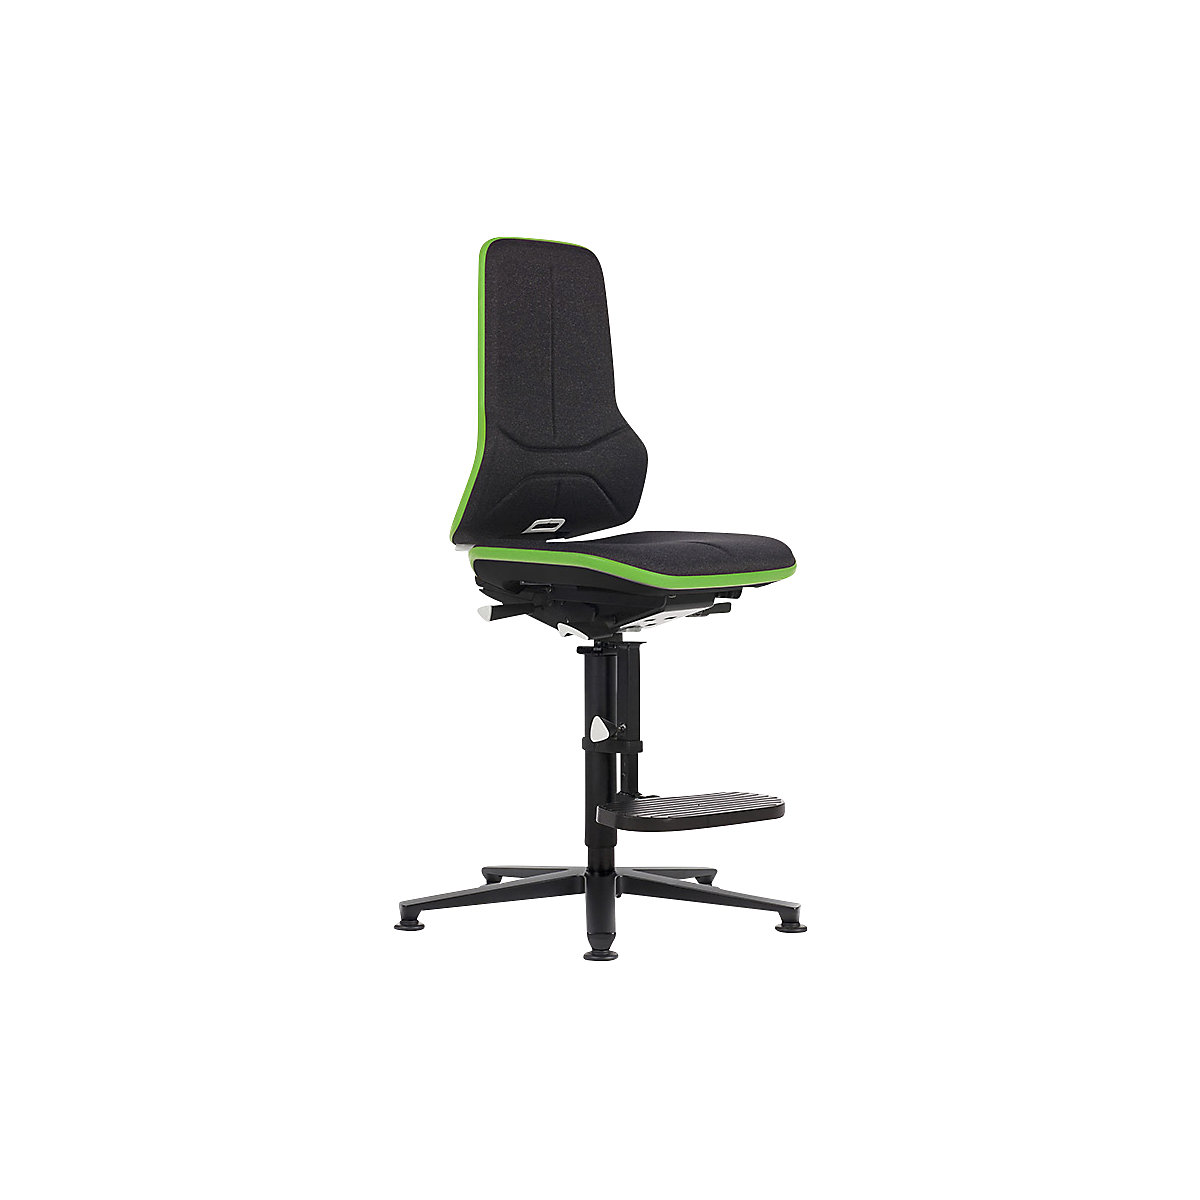 NEON ESD industrial swivel chair, floor glides, step-up – bimos, synchronous mechanism, fabric, green bumper-5